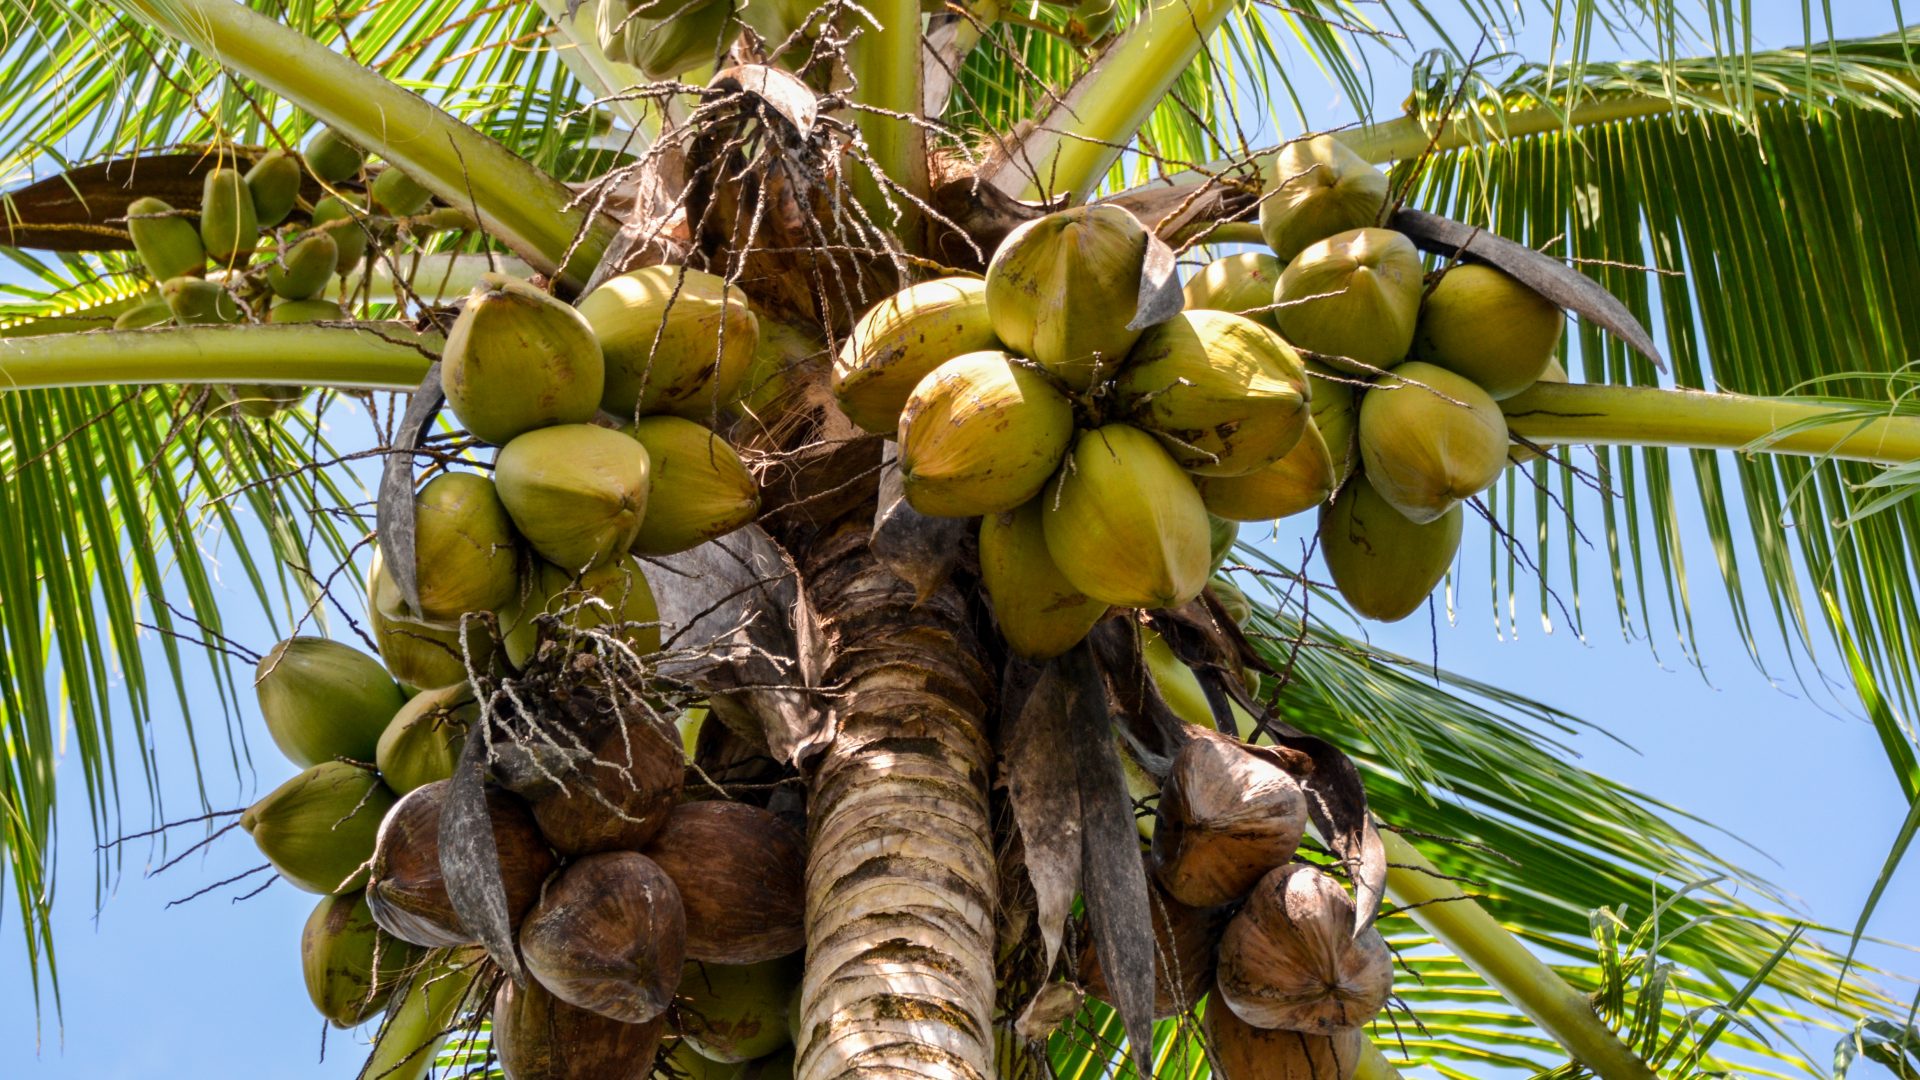 The camera is angled up into the top of a coconut palm tree, full of coconut fruit. Patches of blue sky are visible though the green palm leaves.